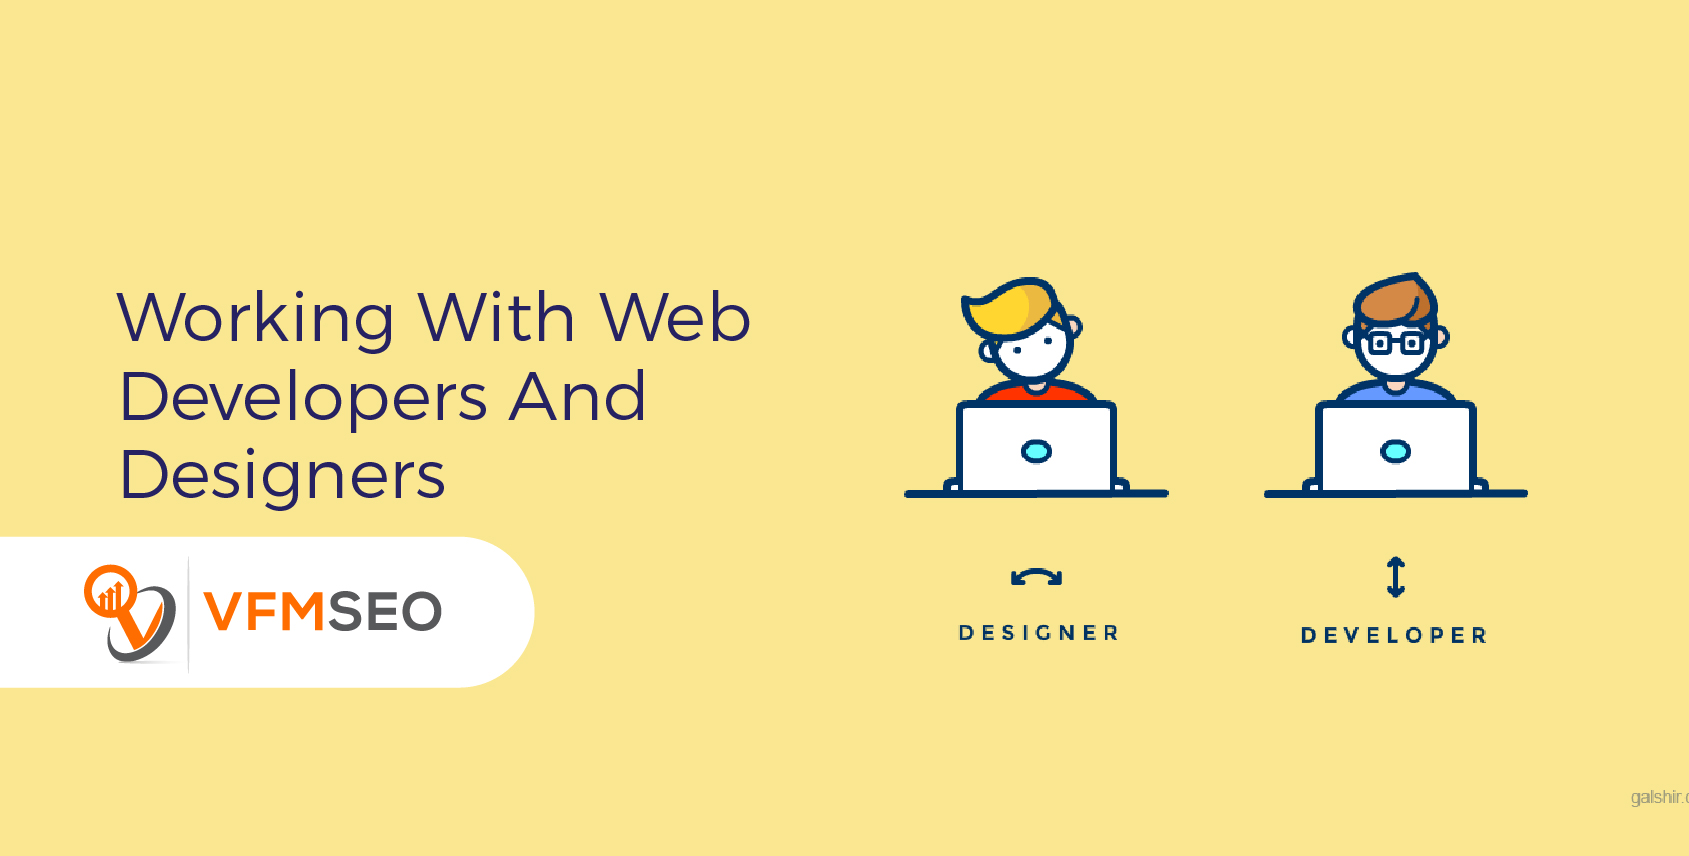 Web Developers And Designers